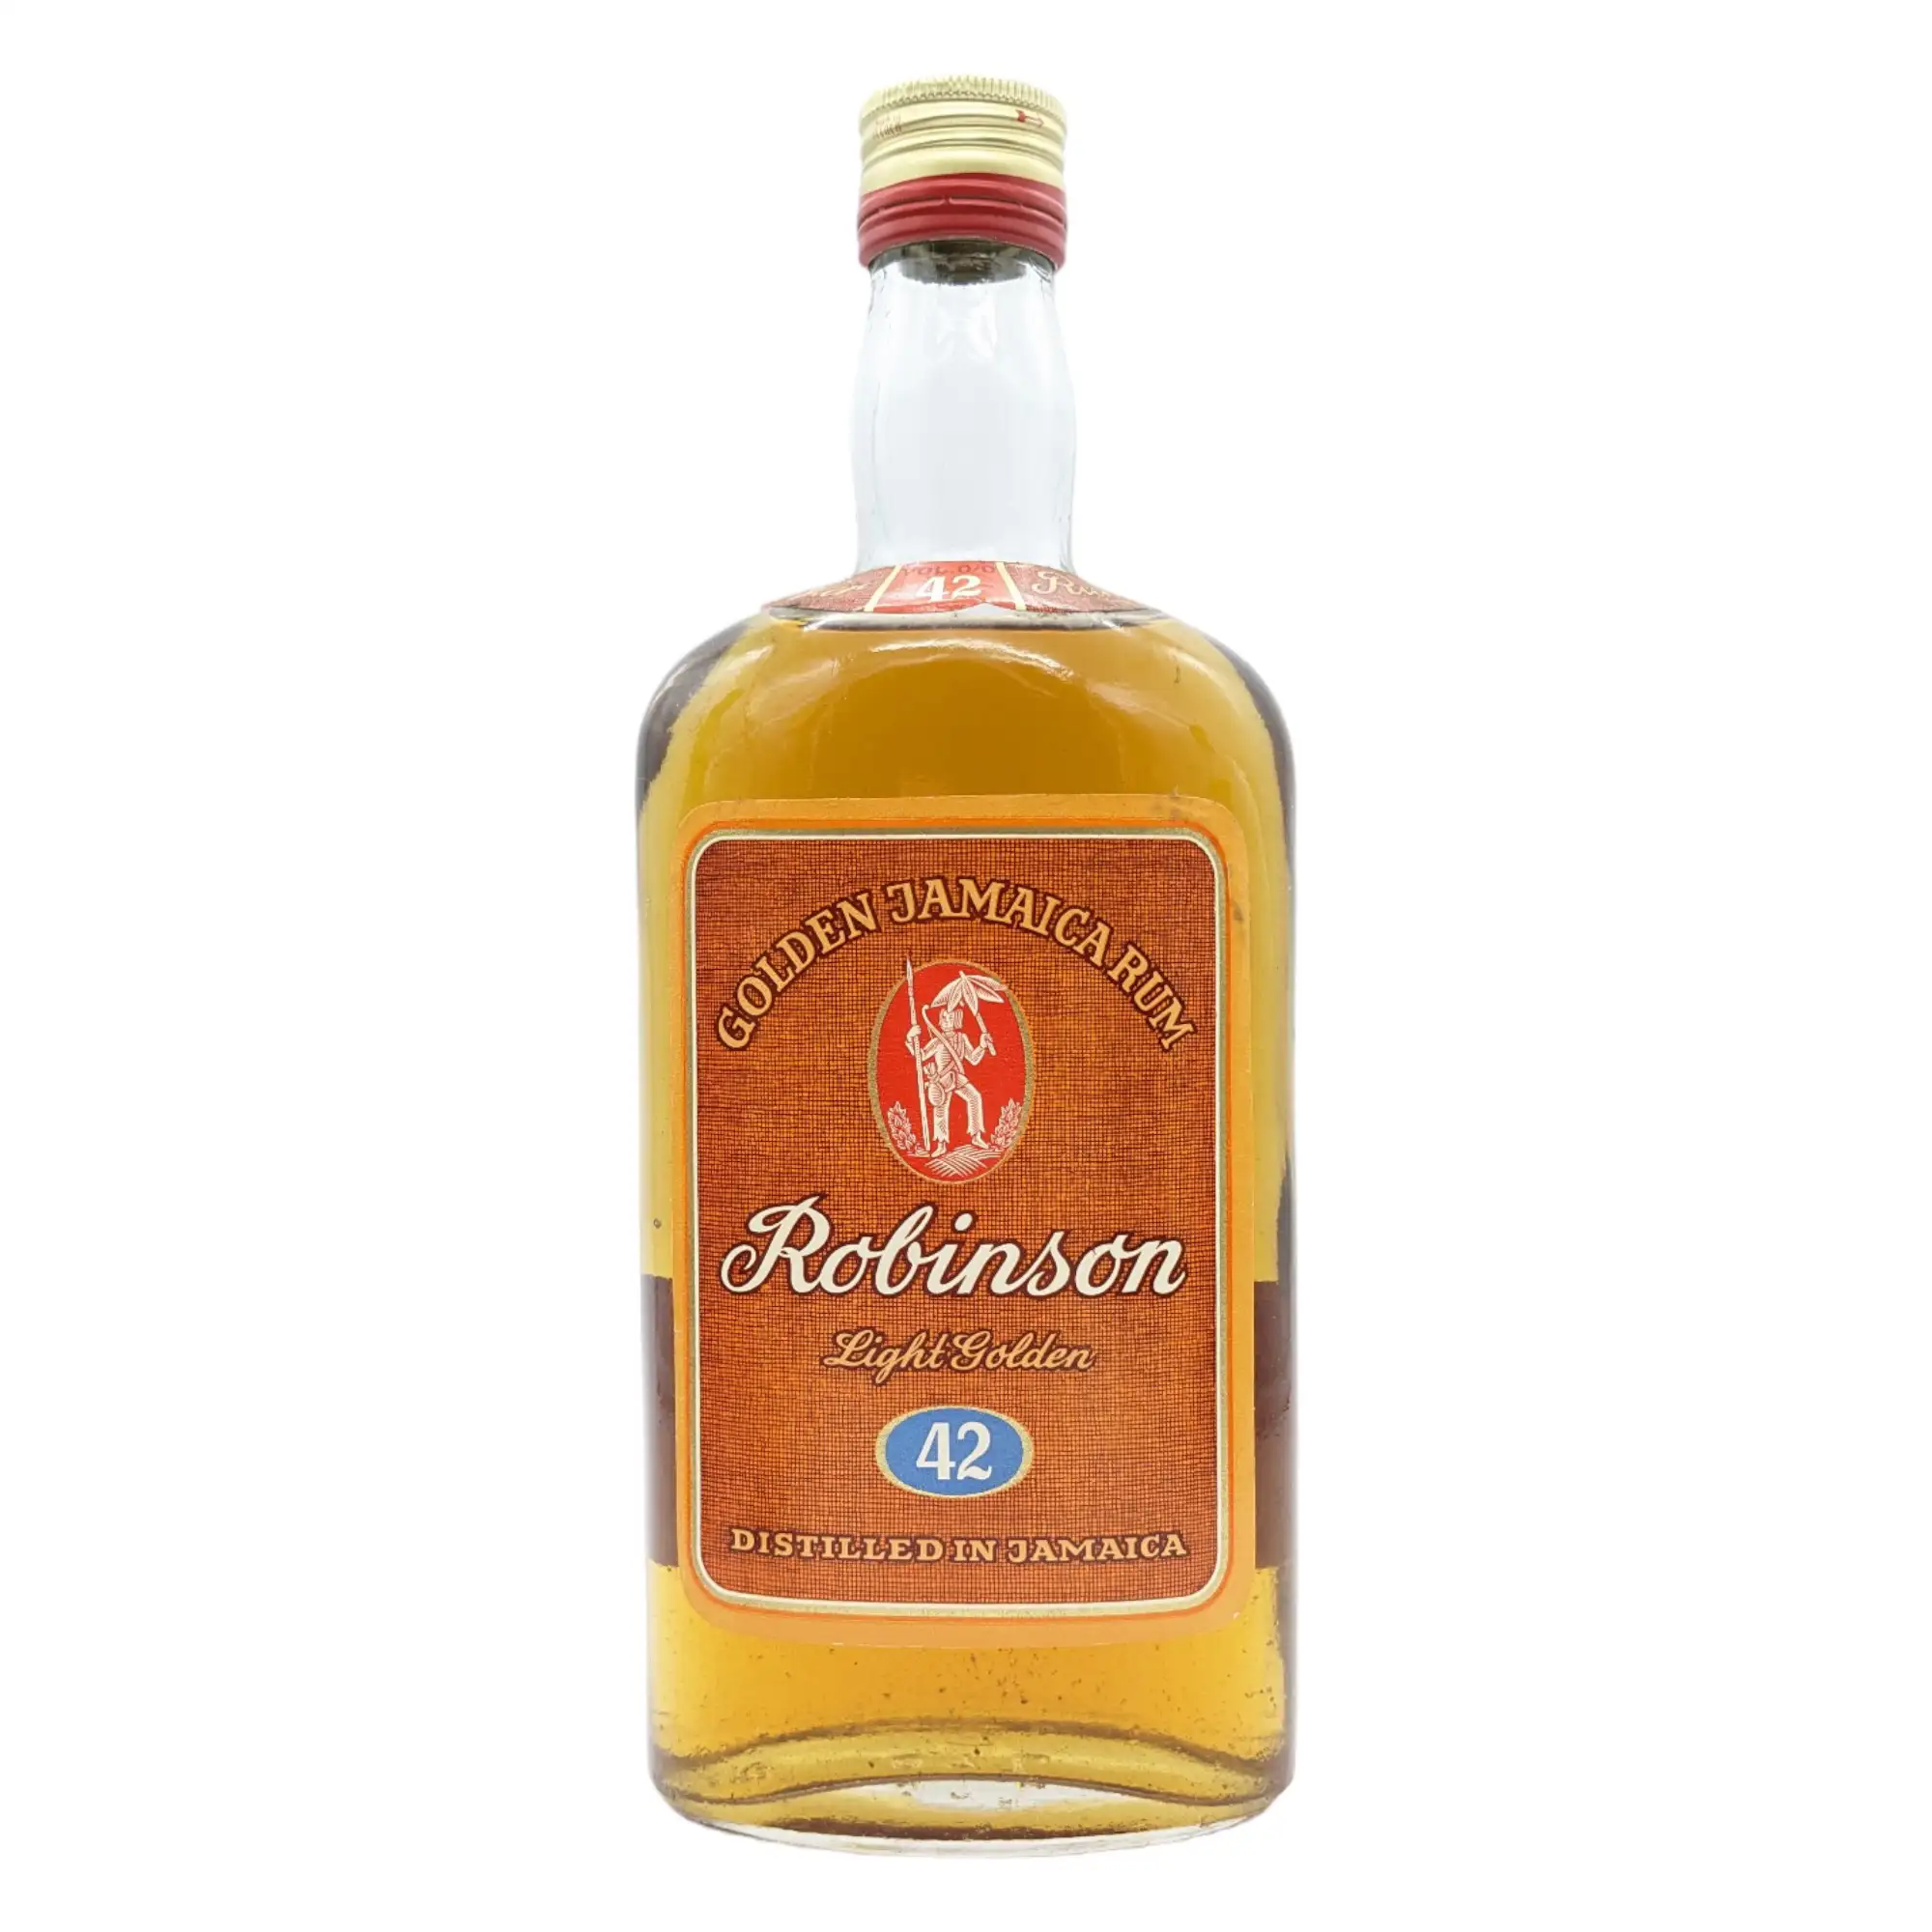 Image of the front of the bottle of the rum Robinson Golden Jamaica Rum Light Golden